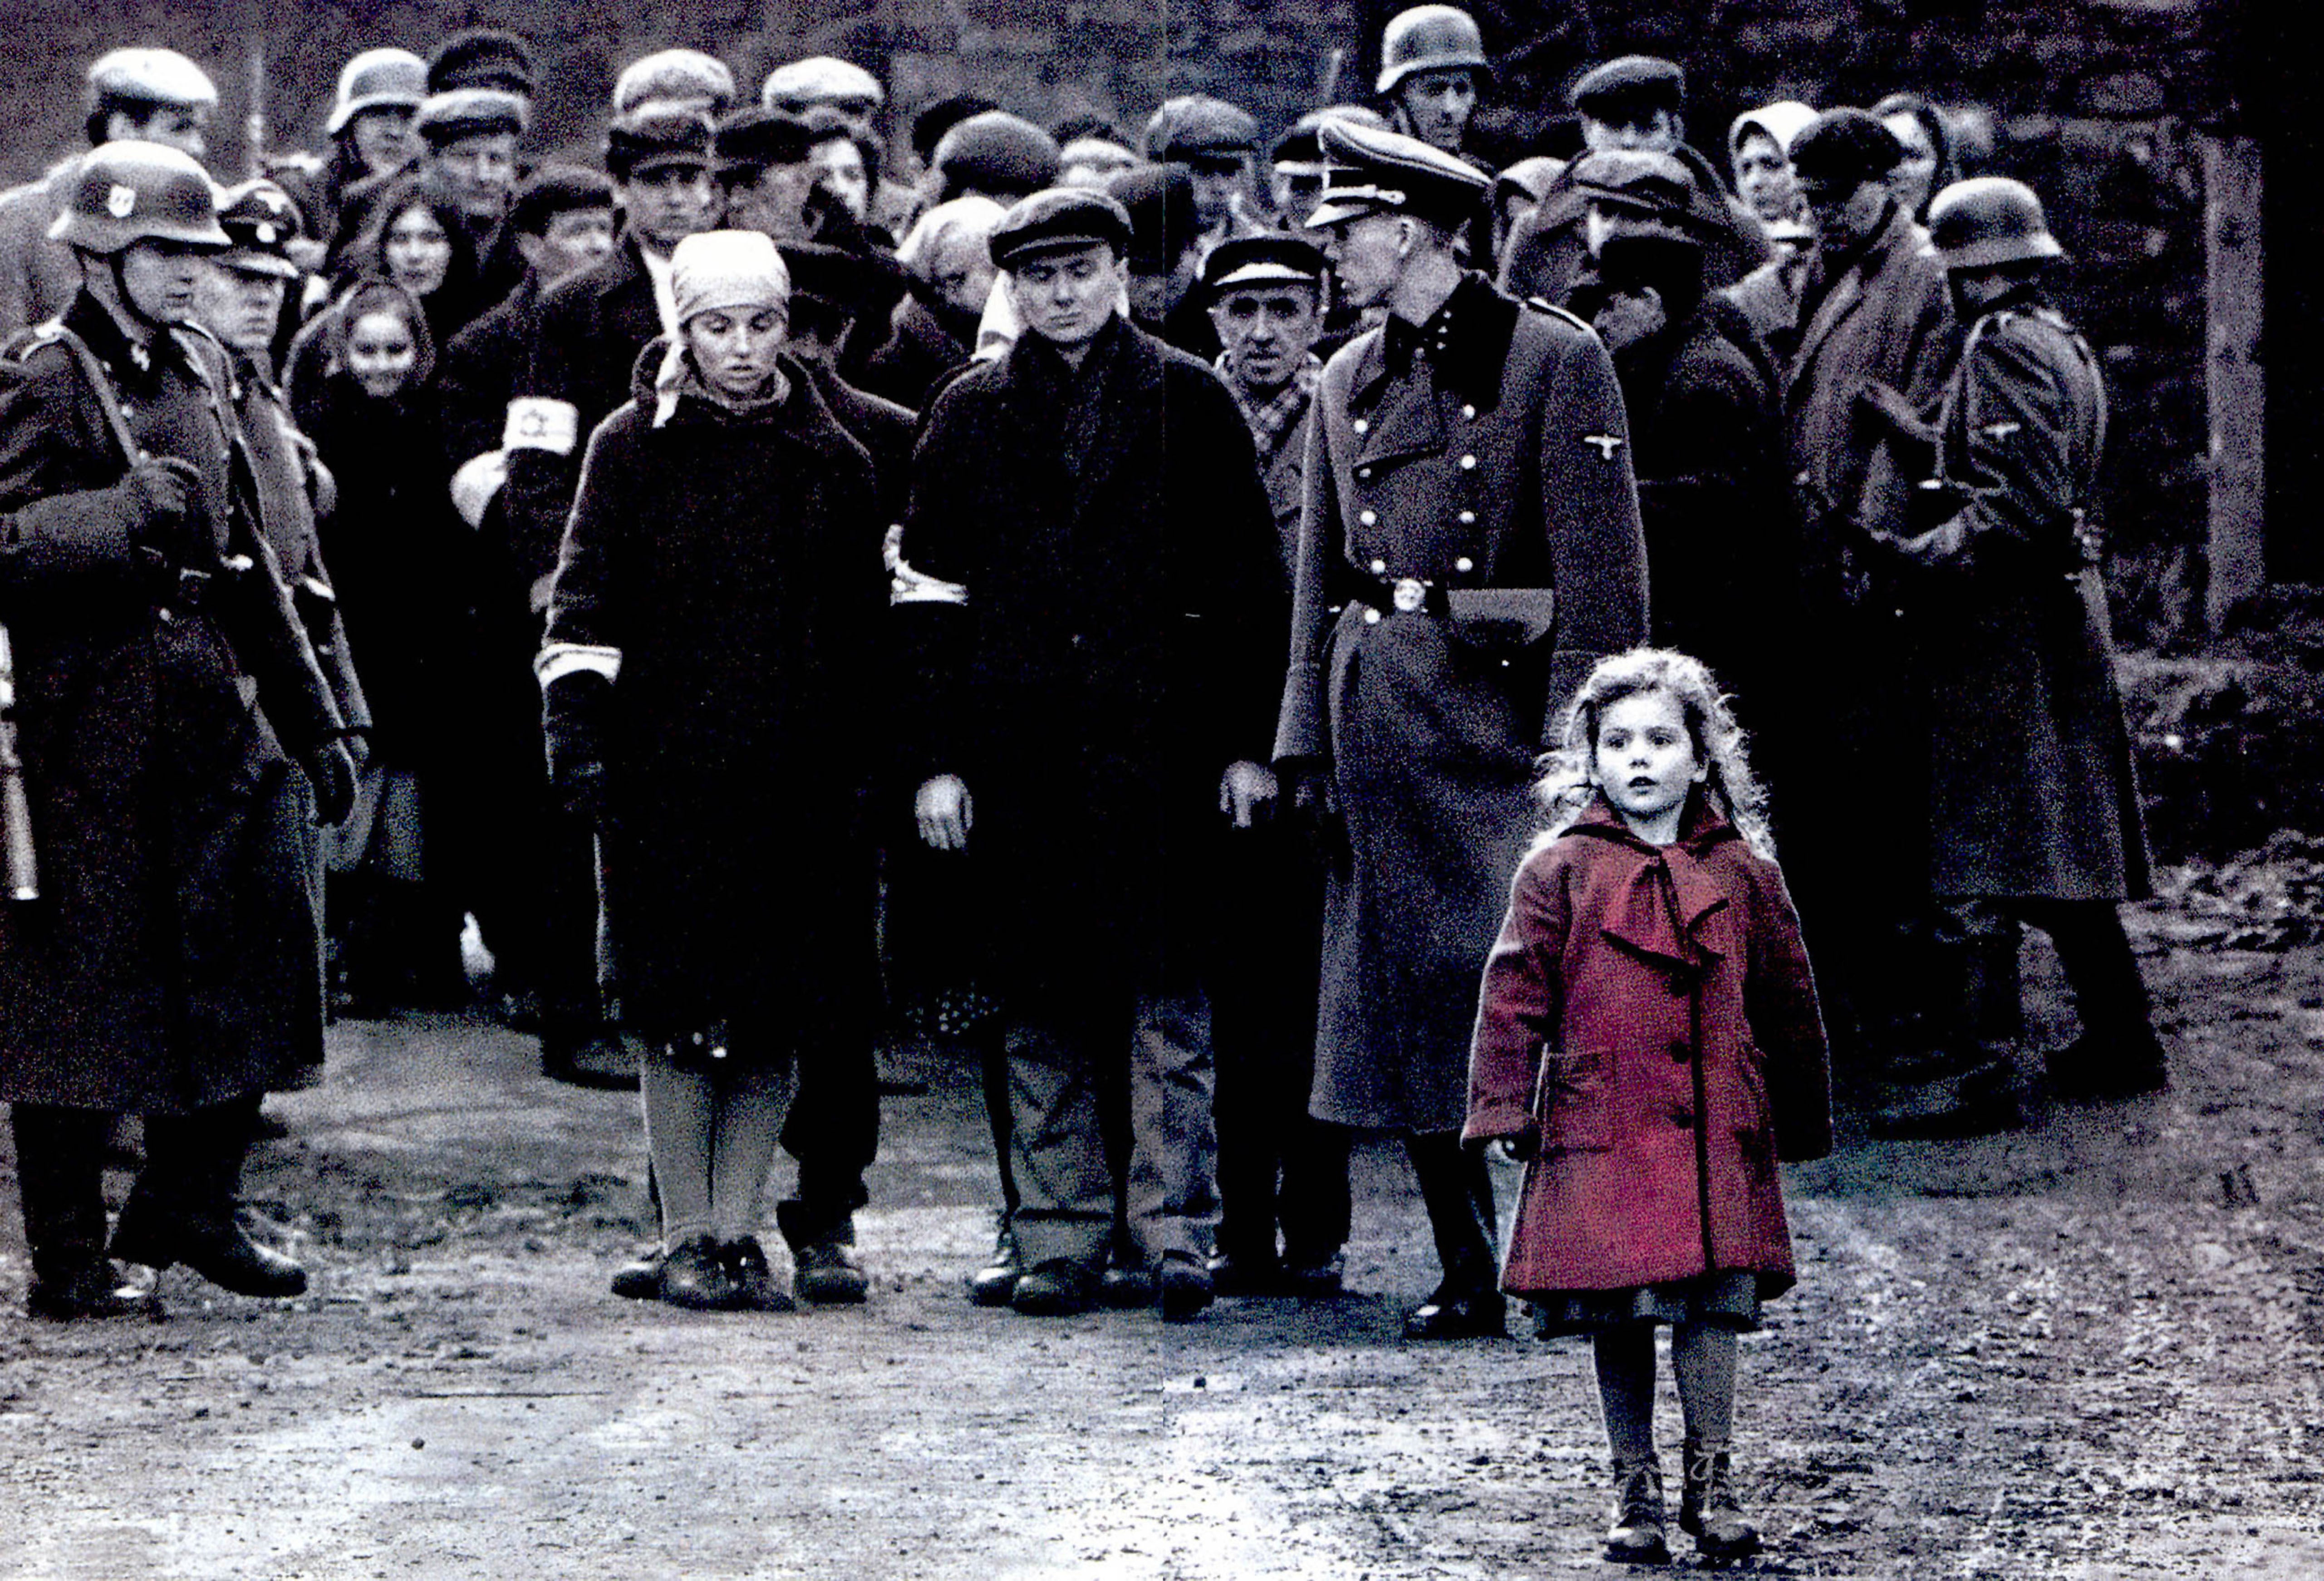 Oliwia Dabrowska as the girl in the red coat in ‘Schindler’s List’ (1994)